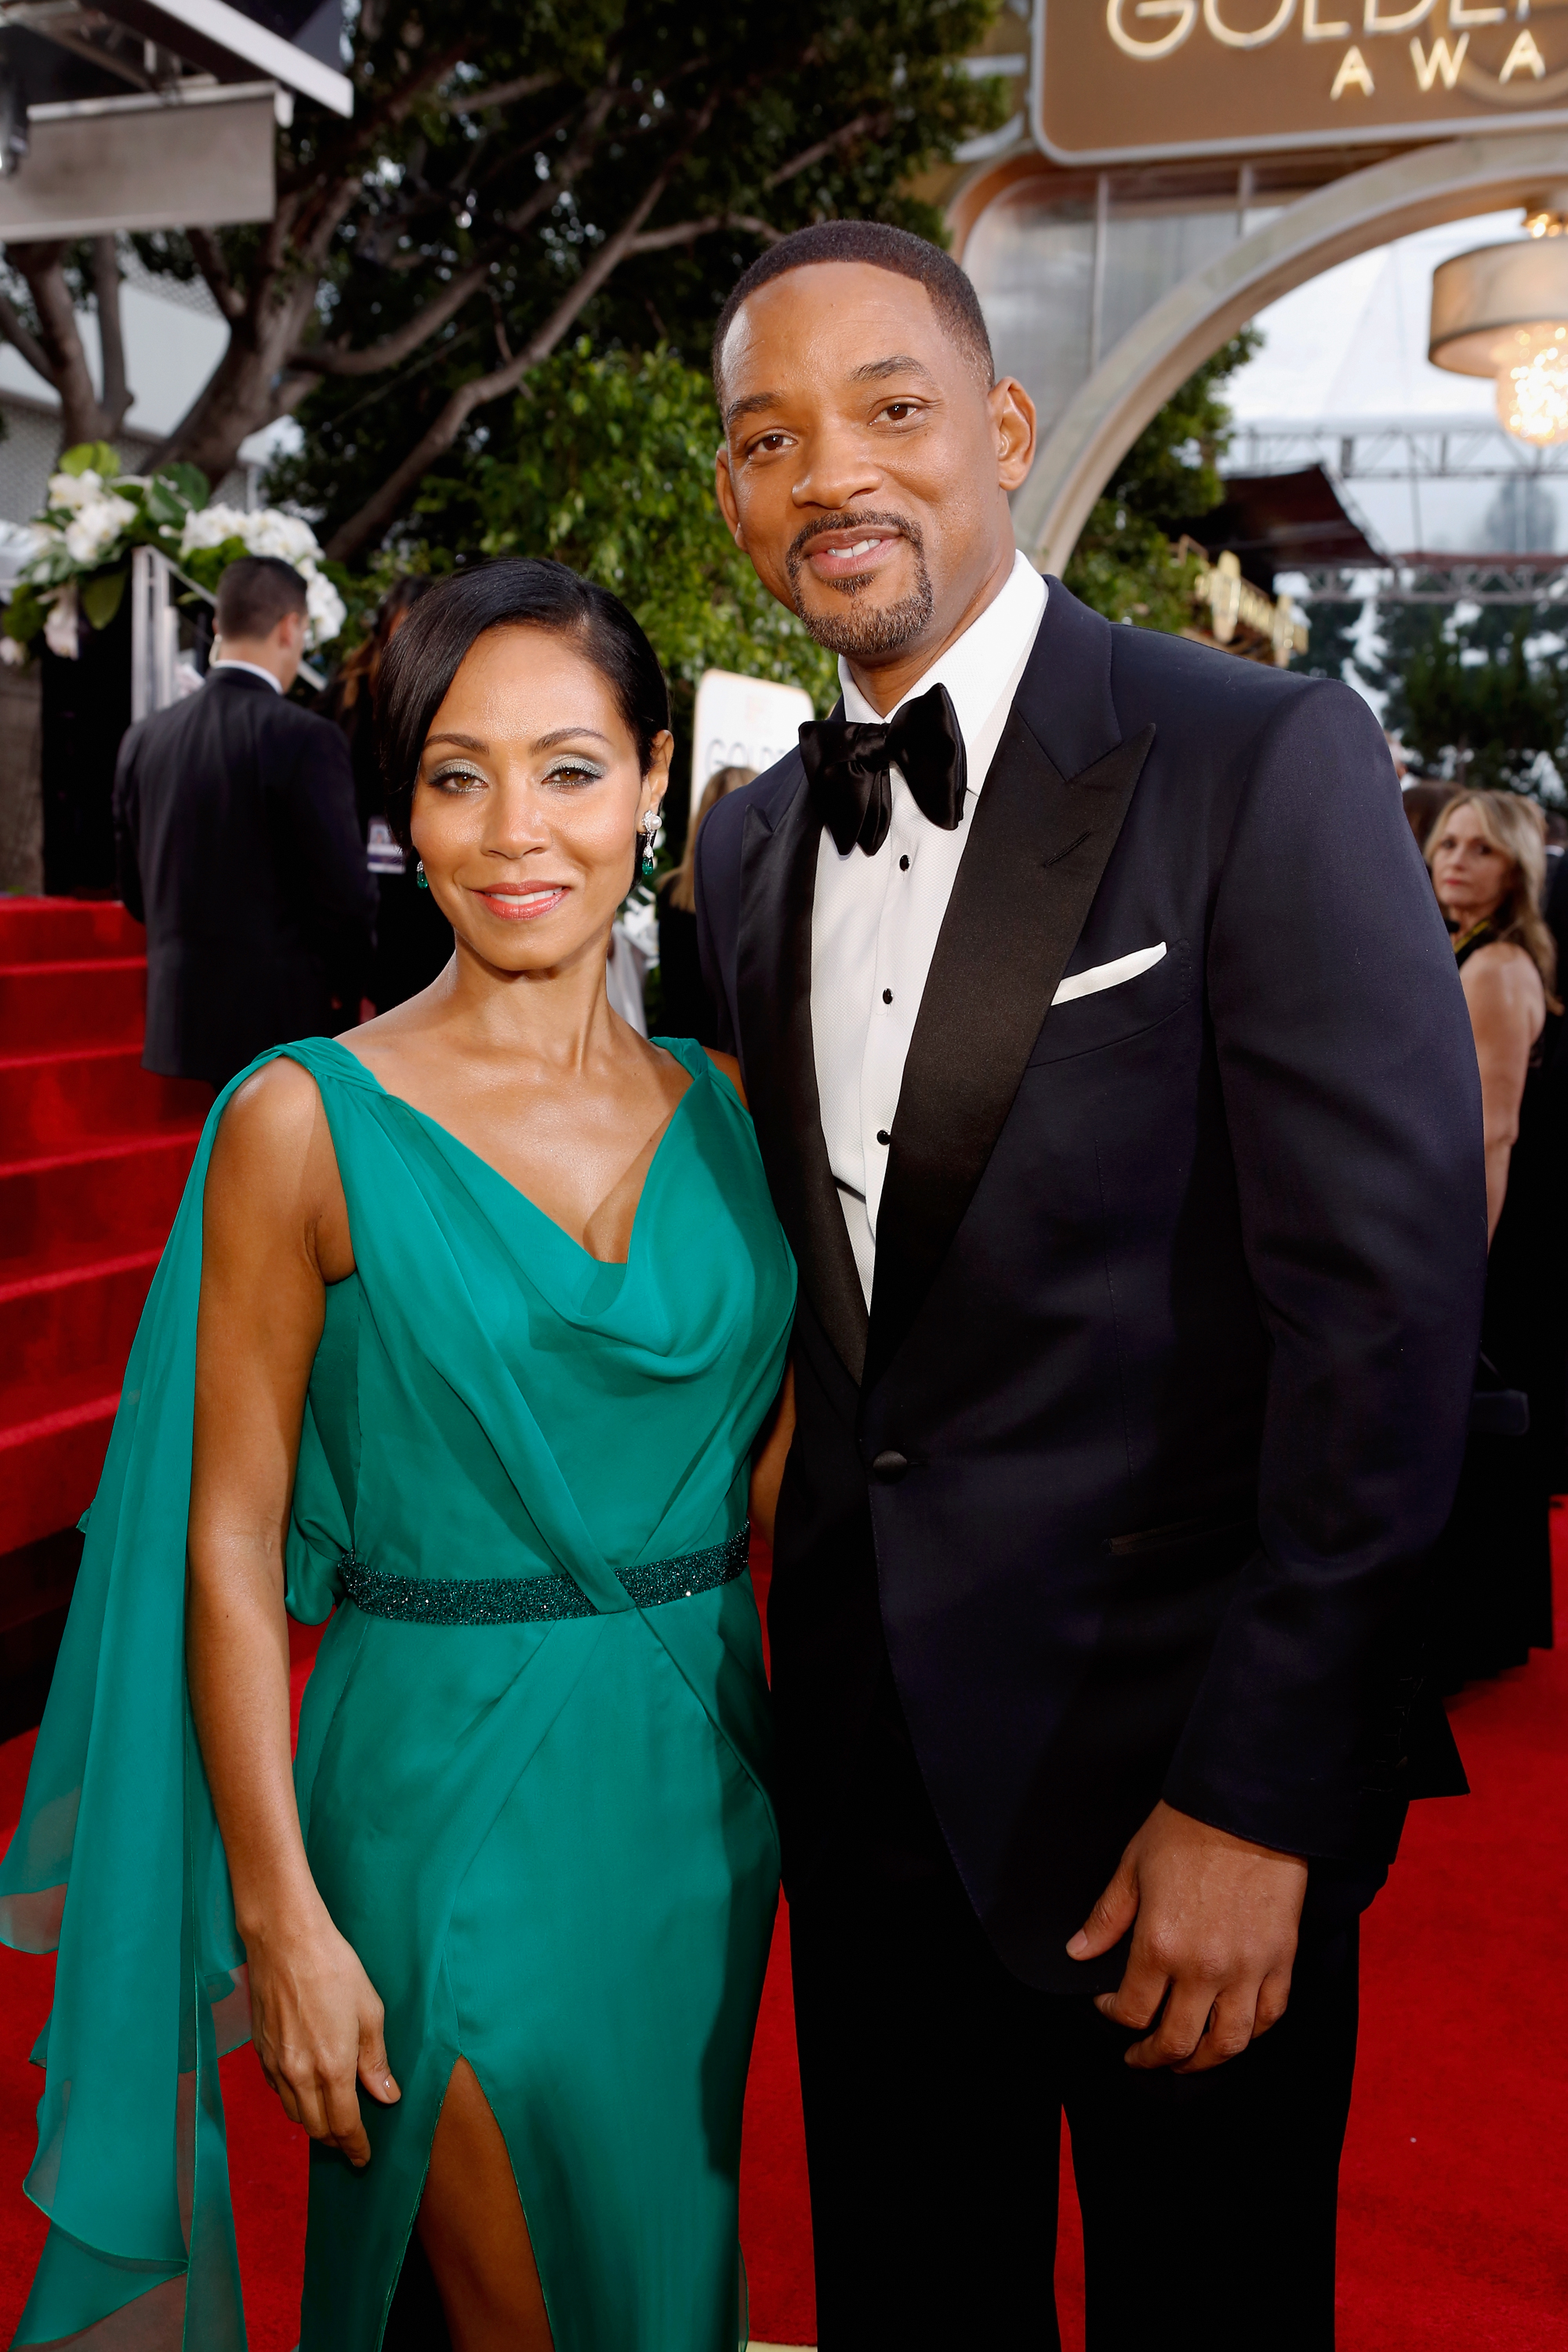 Jada and Will on the red carpet